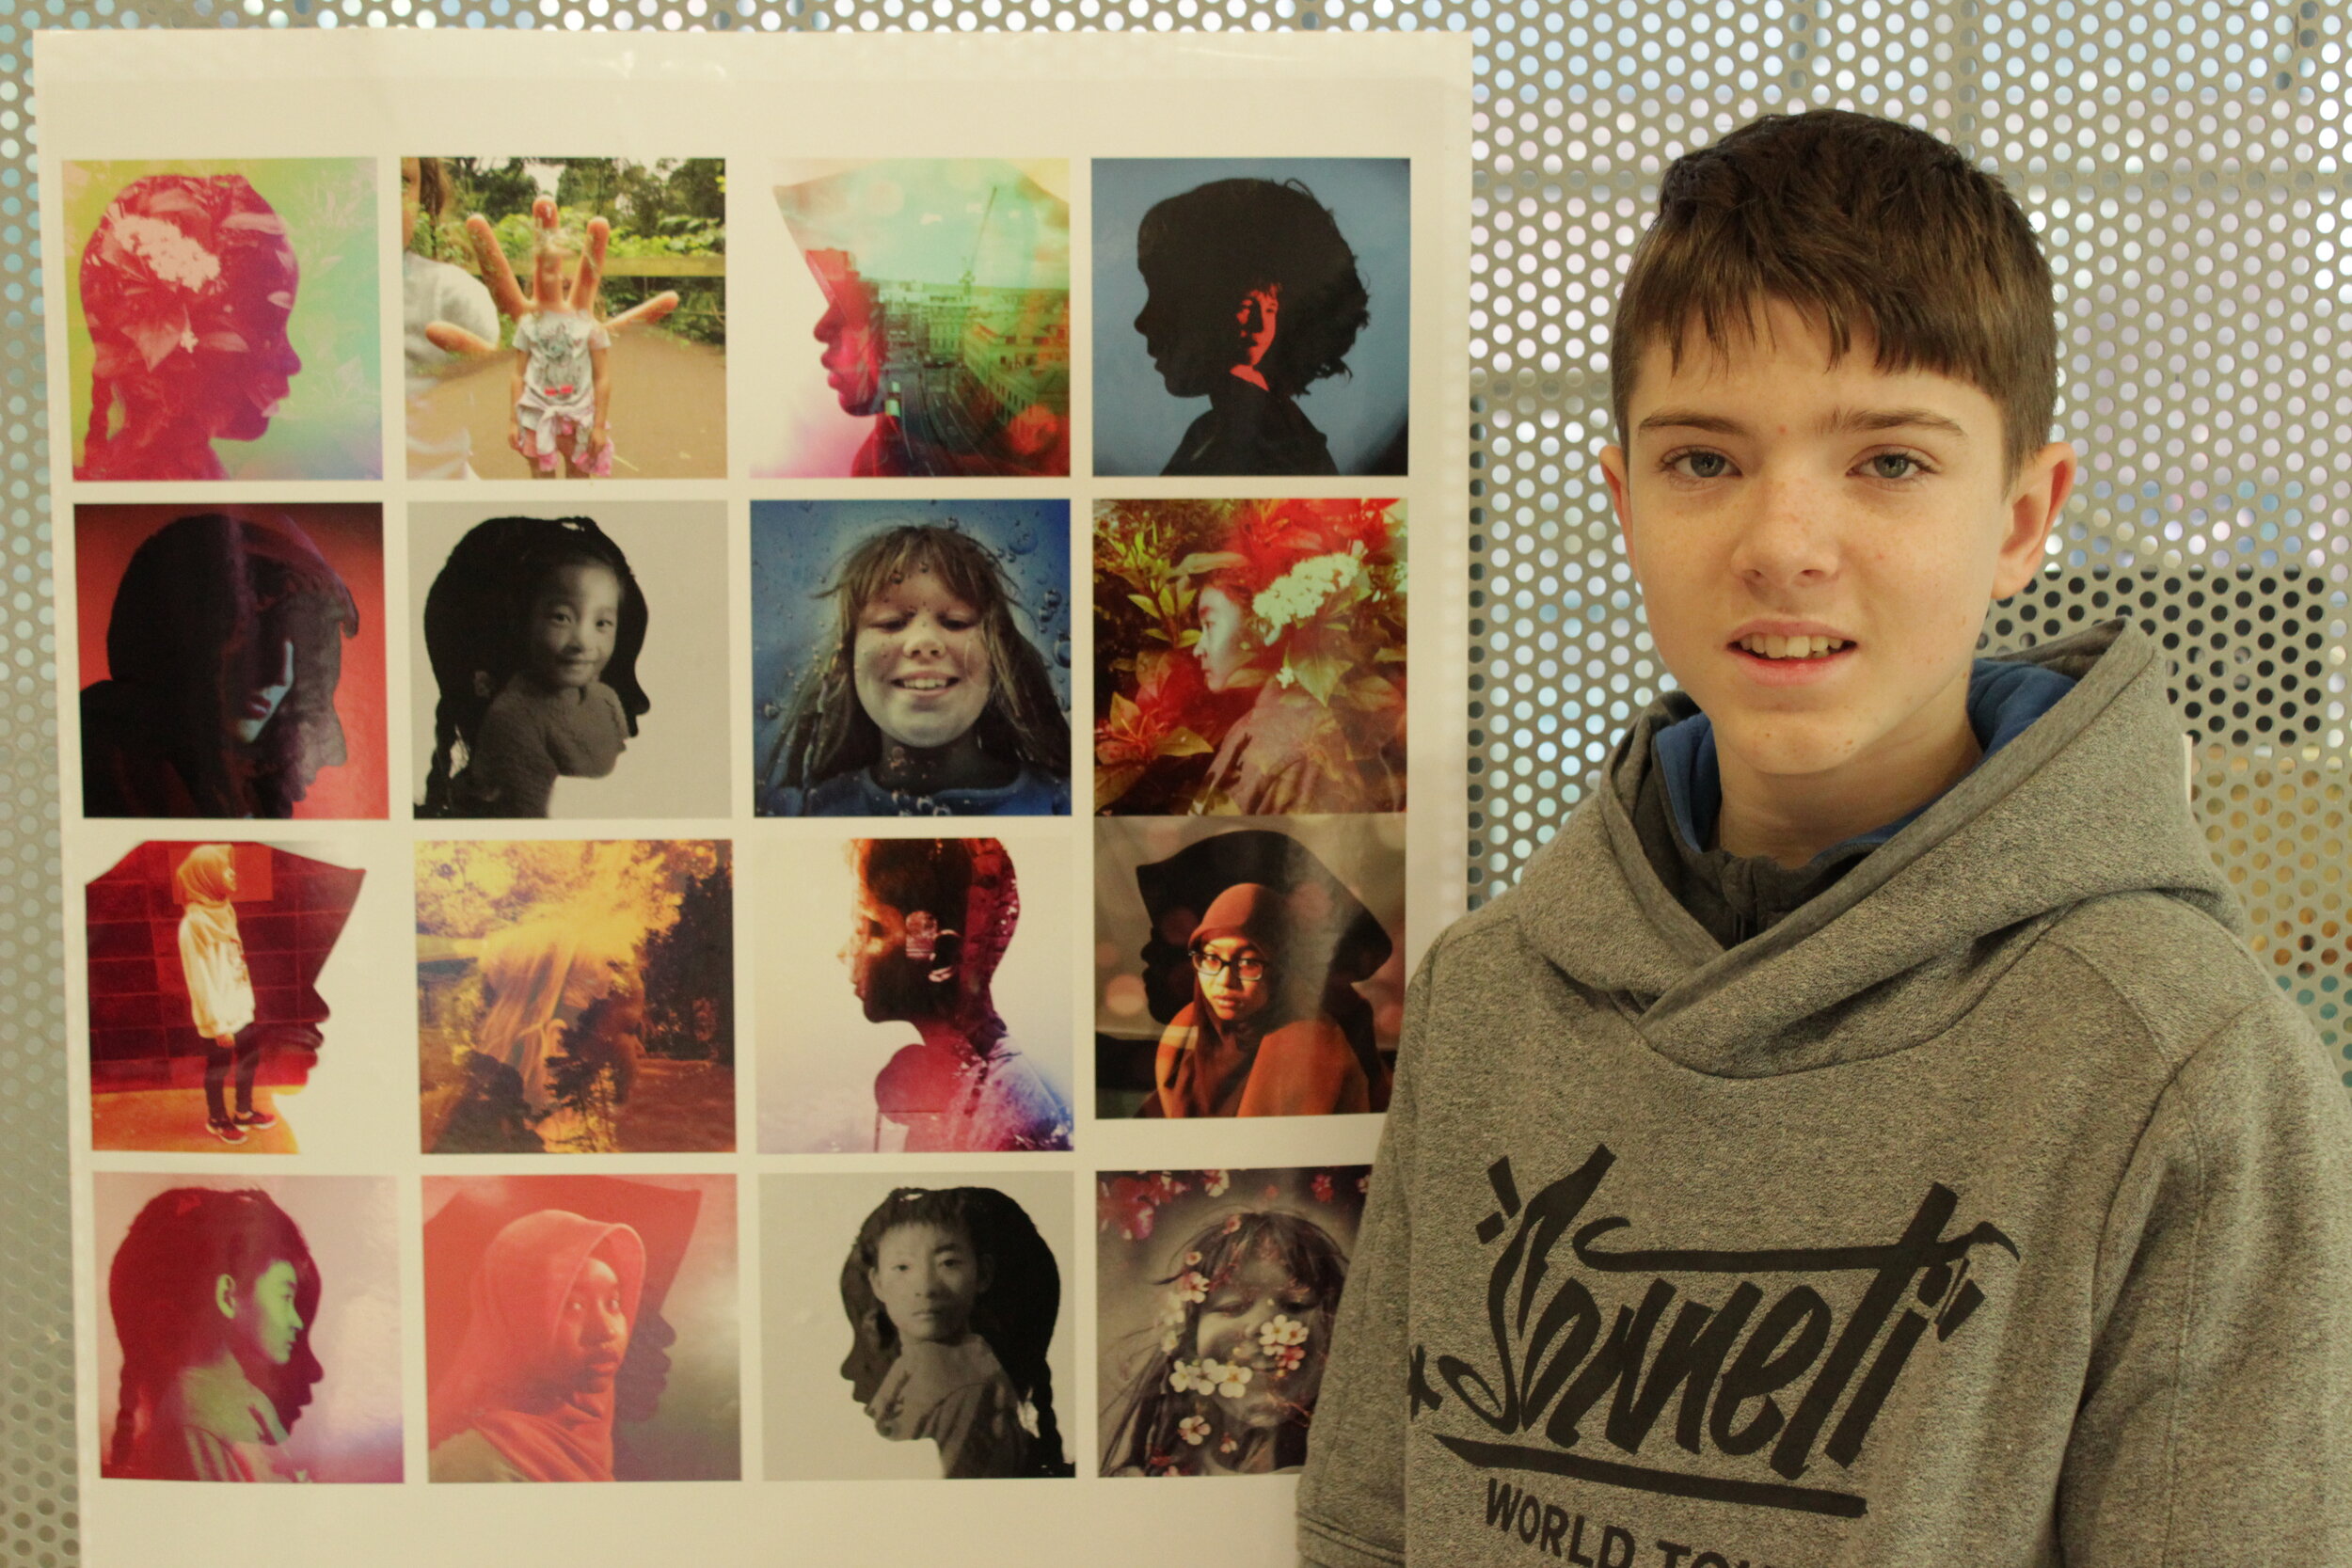 Young boy standing beside the images he has taken while they are displayed at a gallery